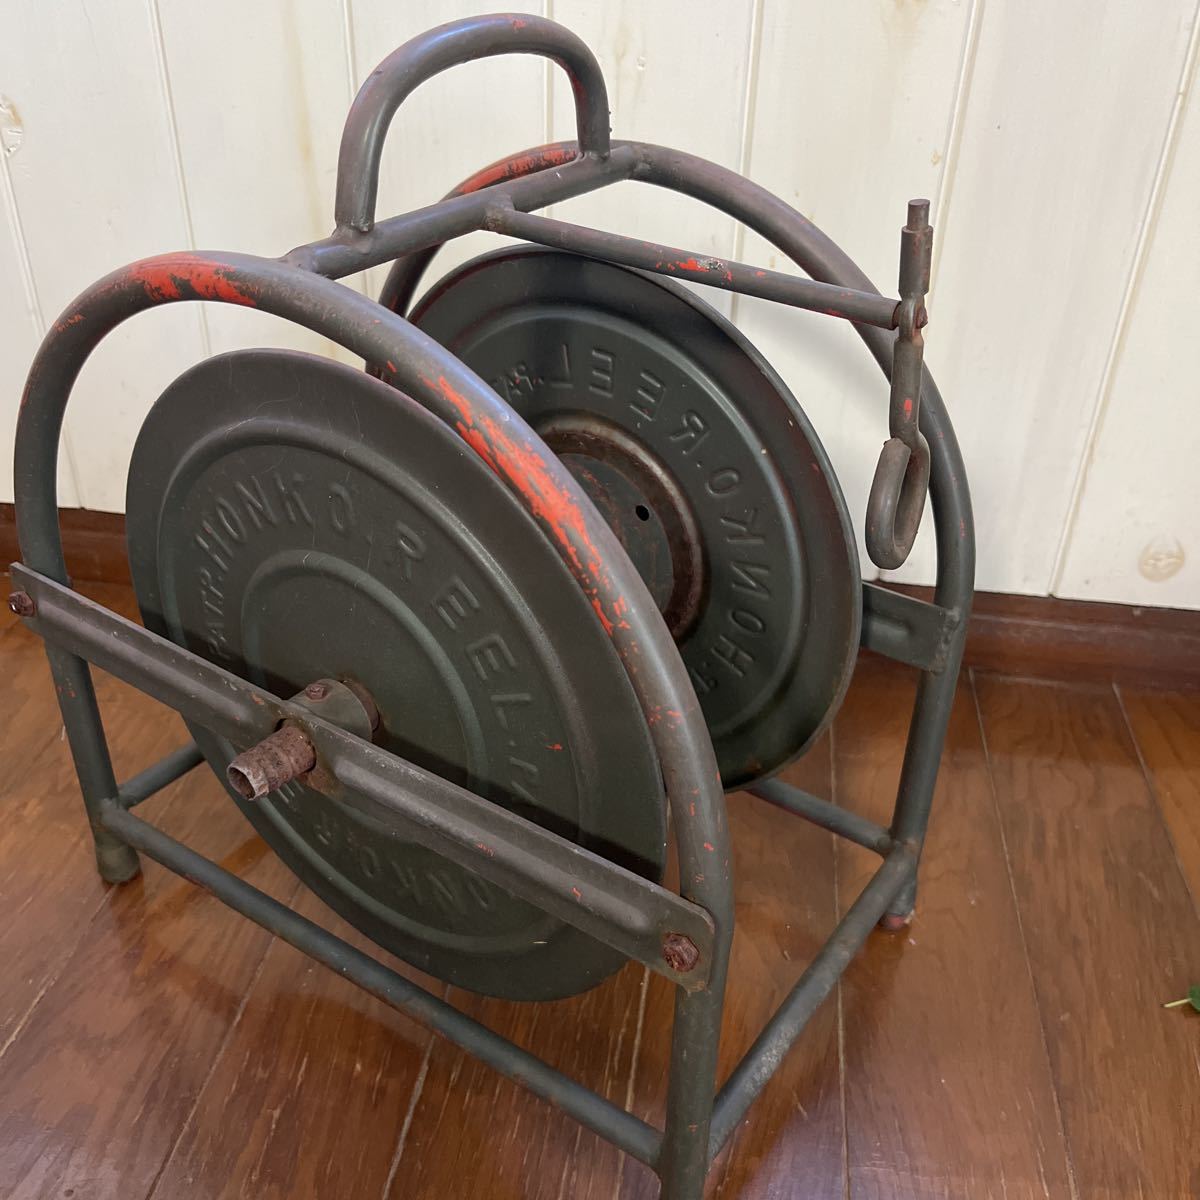  garden miscellaneous goods # iron made hose reel used!